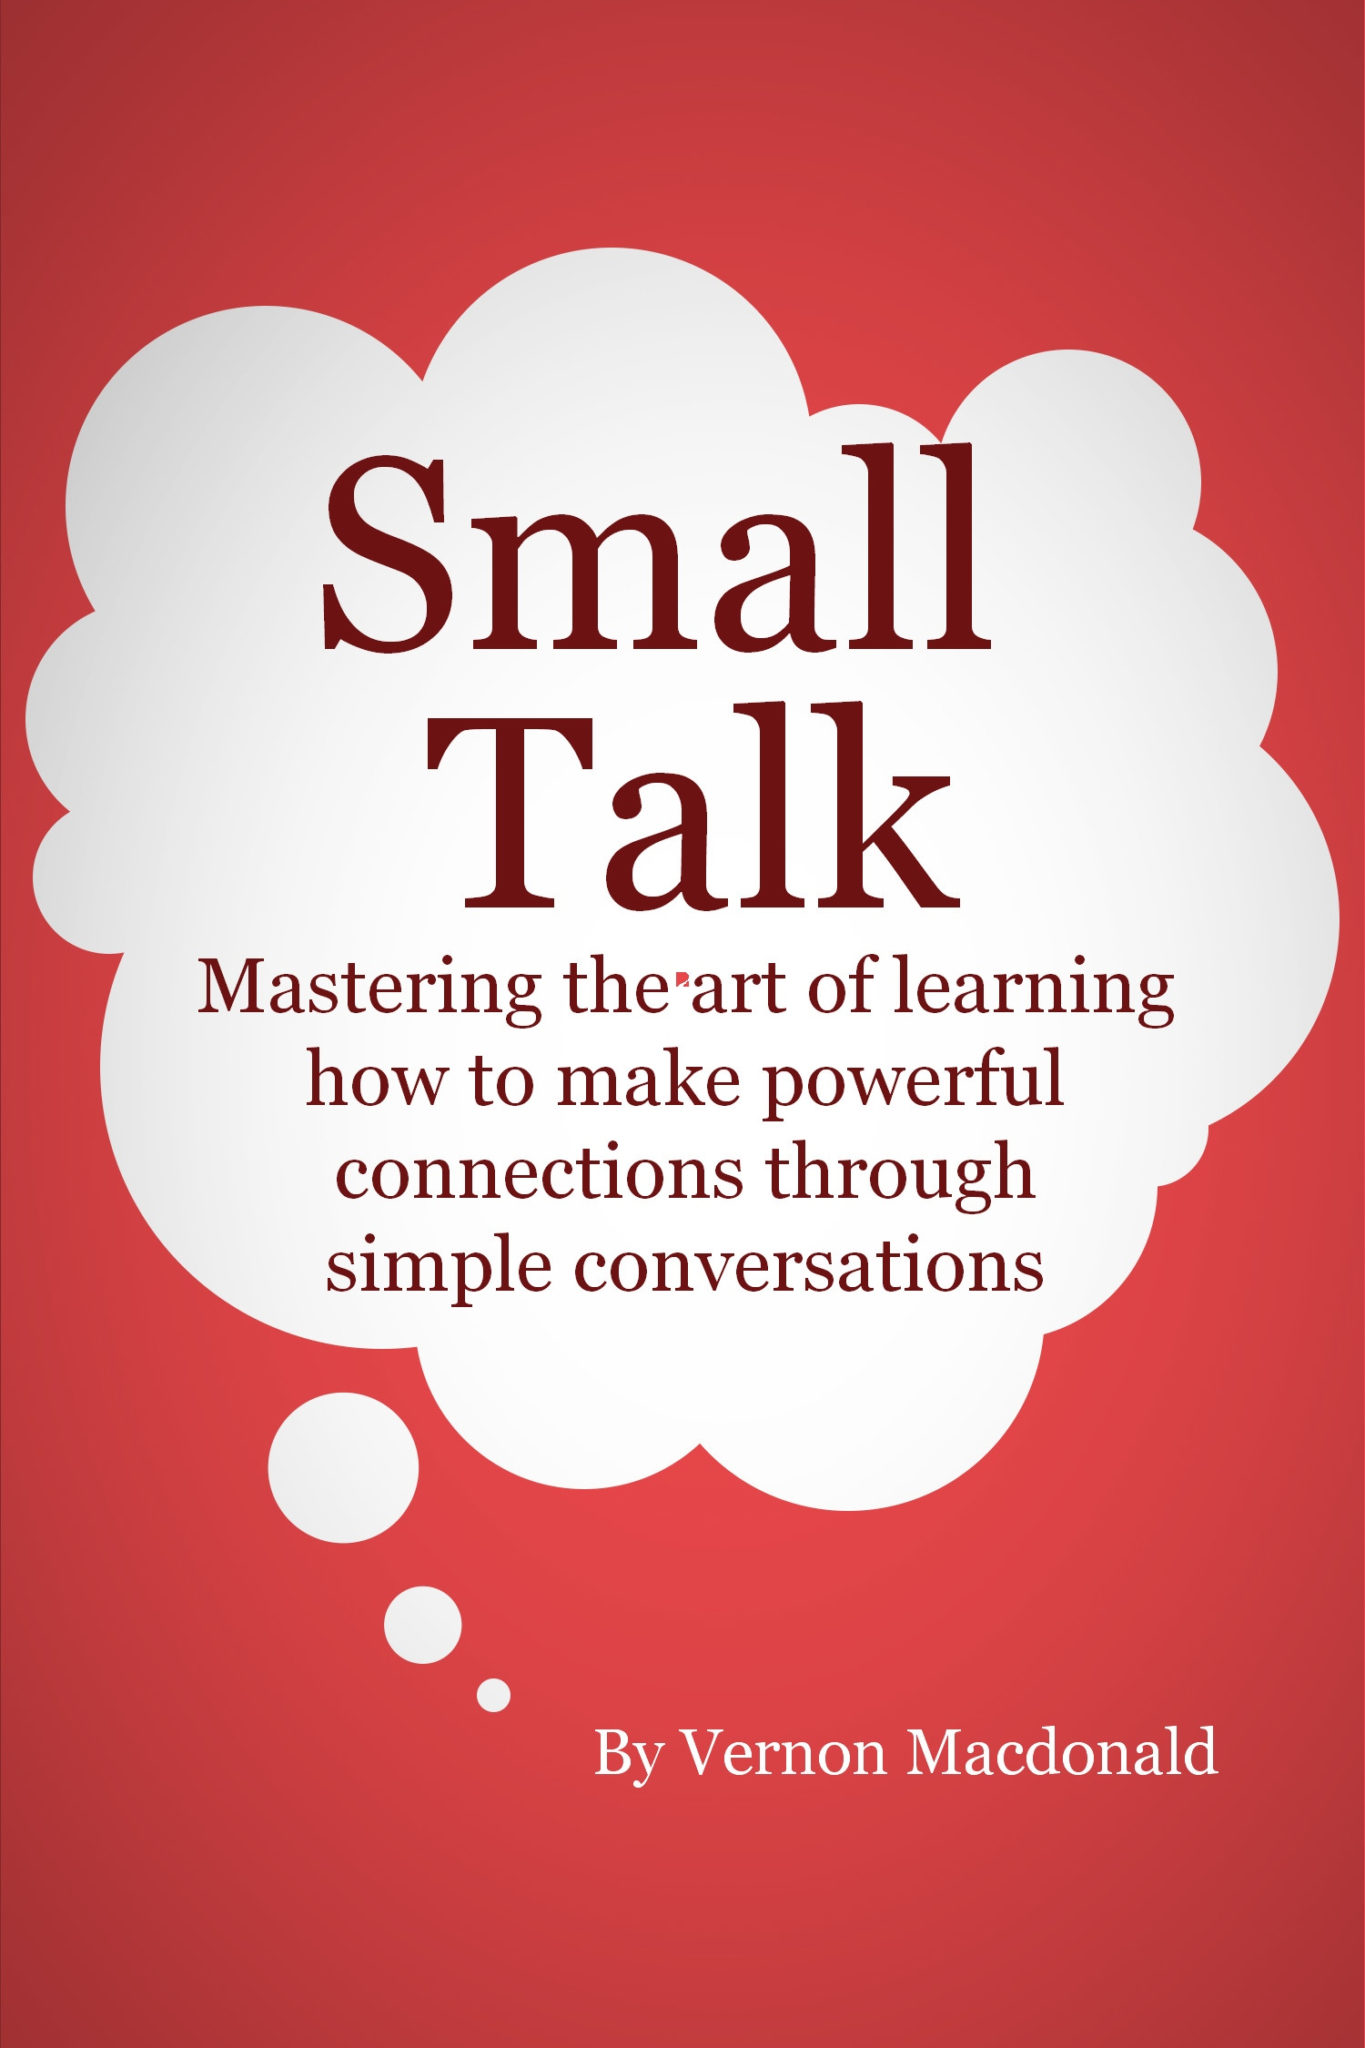 Small Talk: Mastering the art of learning how to make powerful connections through simple conversations by Vernon Macdonald